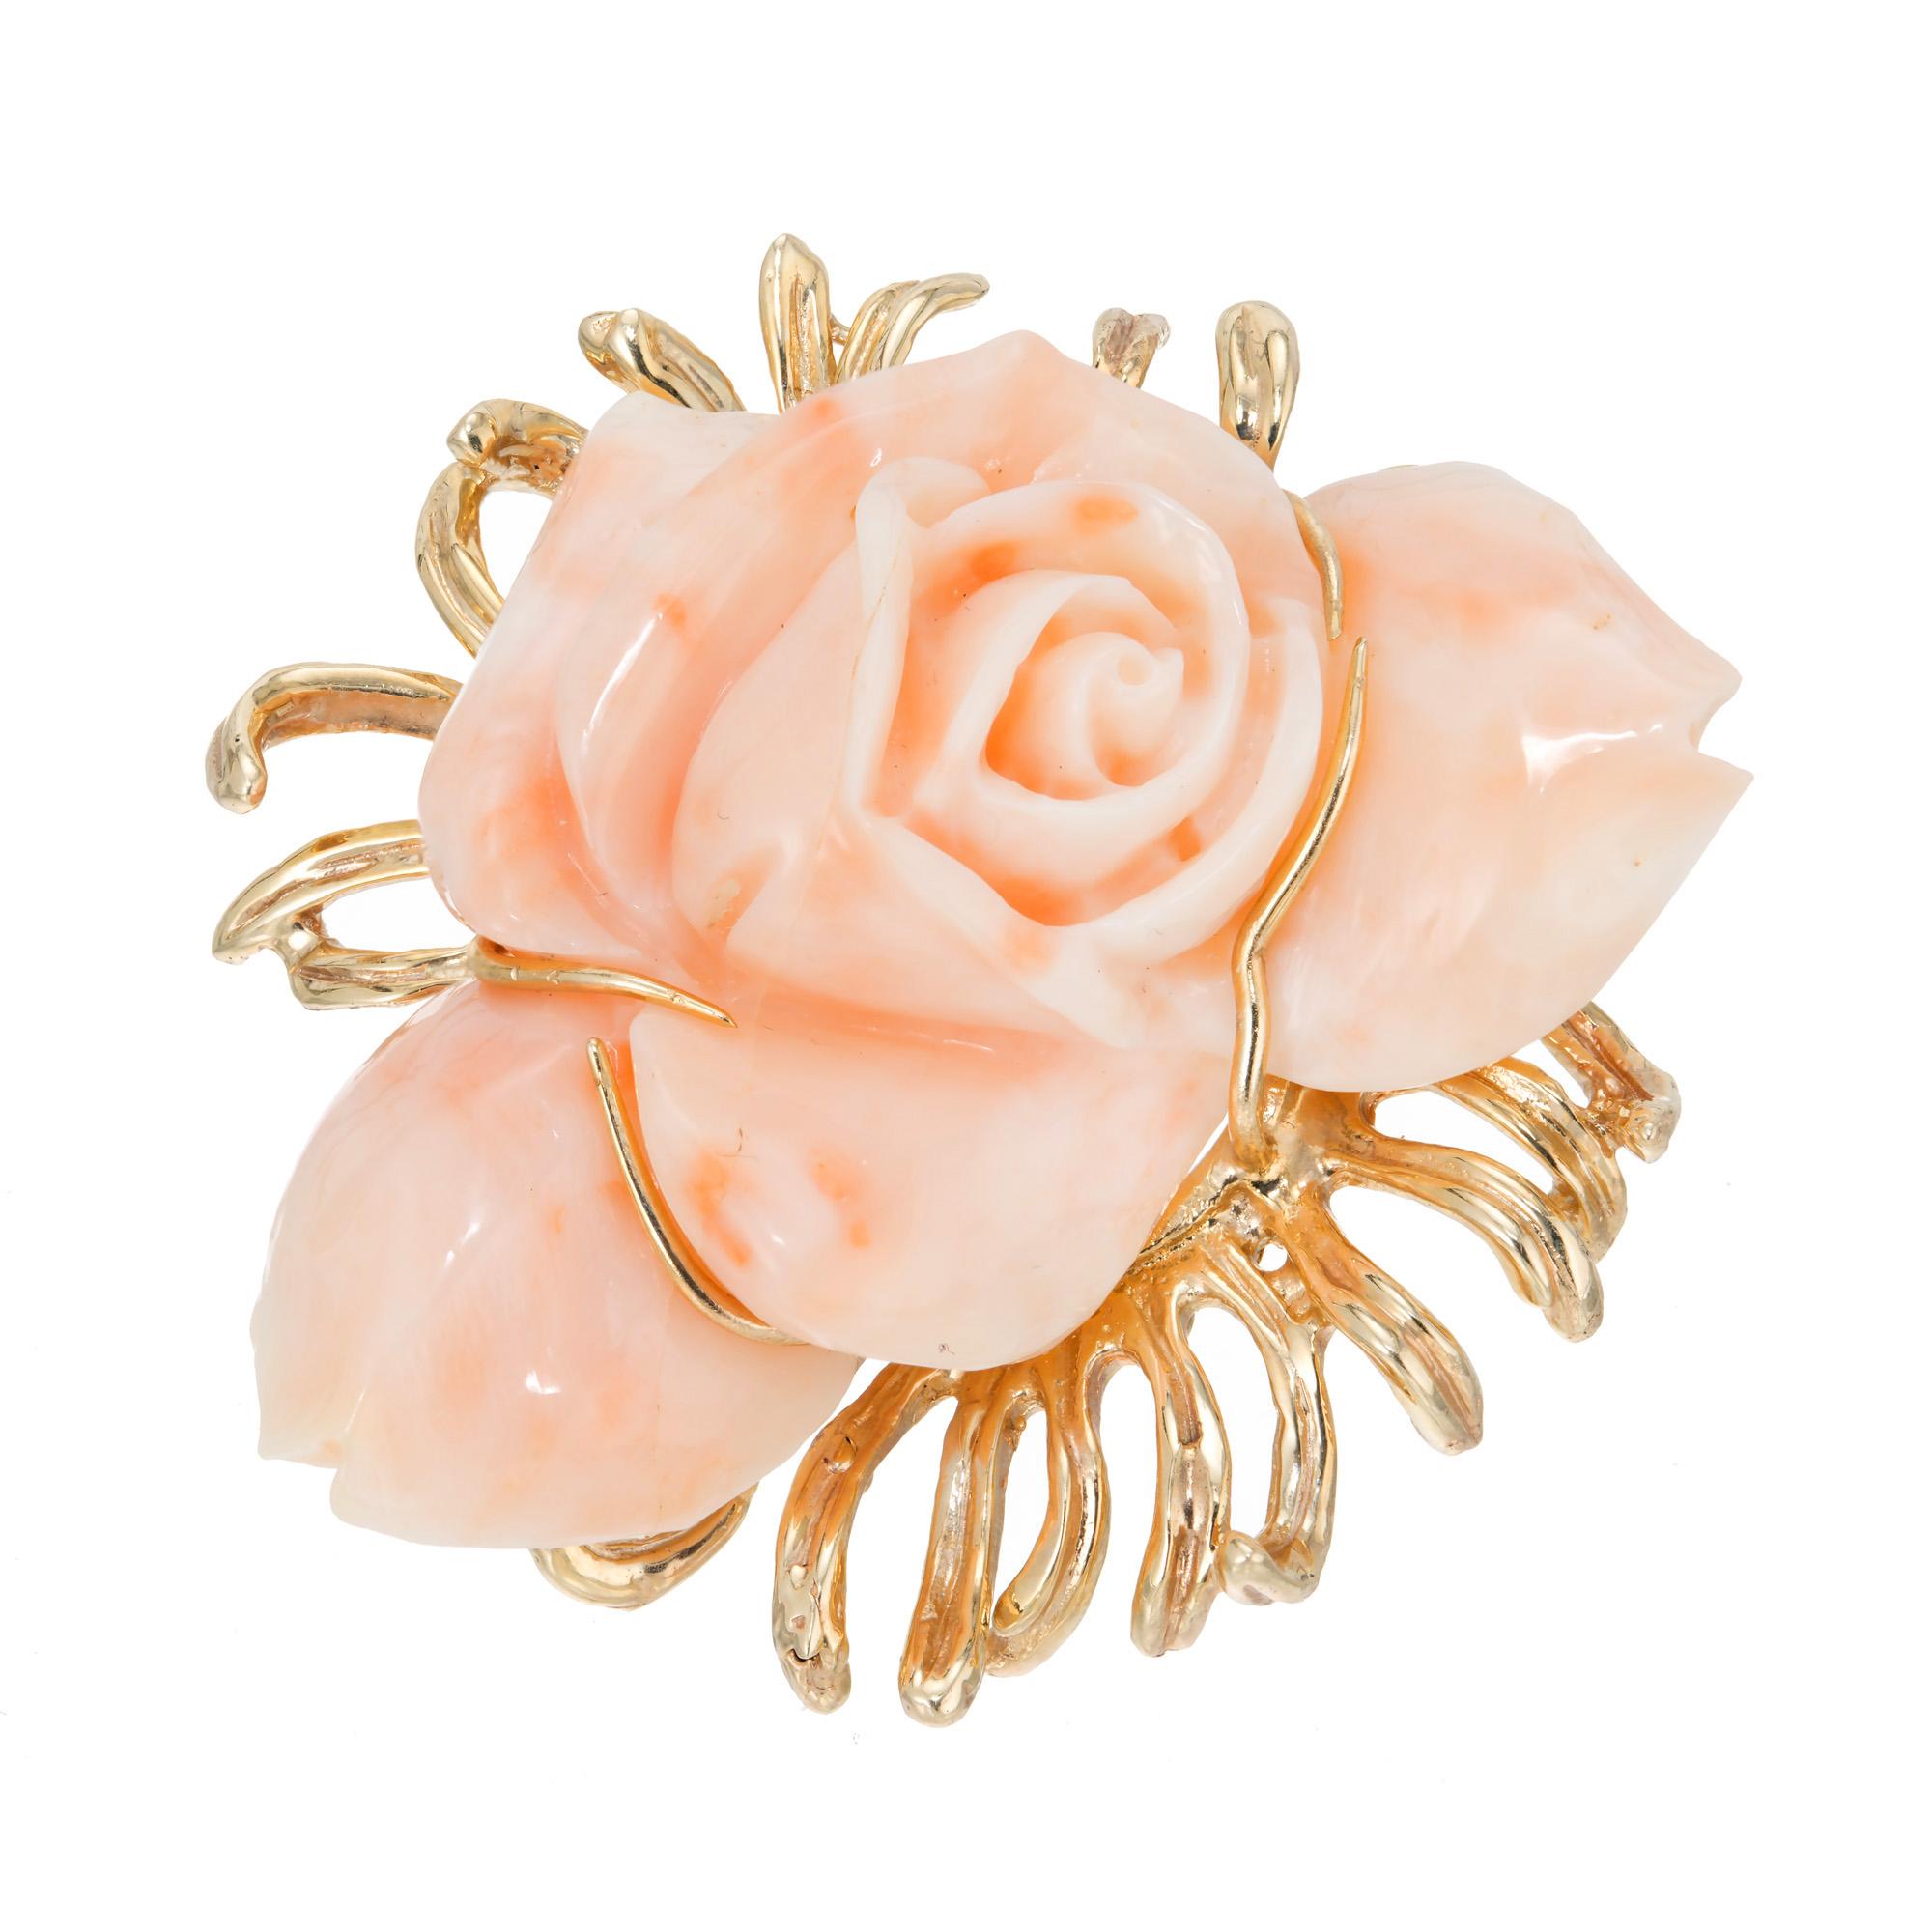 1960's mid-century natural GIA Certified carved floral brooch. One pink rose shaped carved coral set in a 14k yellow gold wire setting. GIA certified no indications of dye. 

Follow us on our 1stdibs storefront to view our weekly new additions and 5